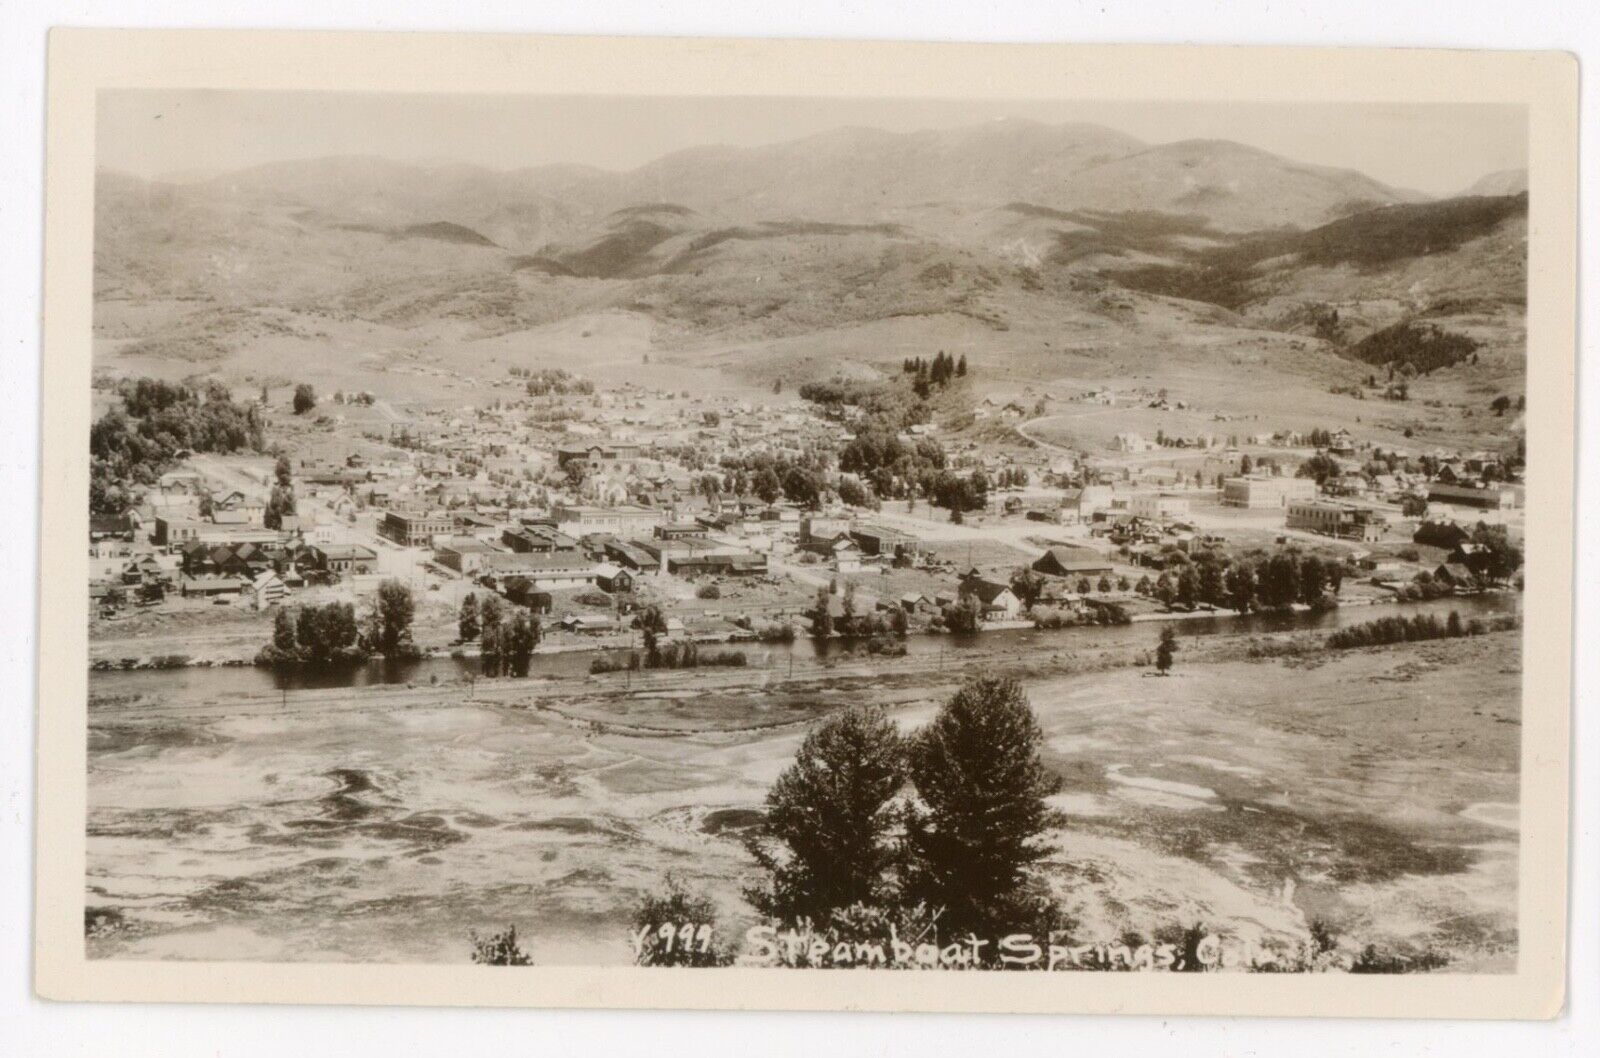 CO, Steamboat Springs. AERIAL VIEW OF THE TOWN. Real Photo Postcard